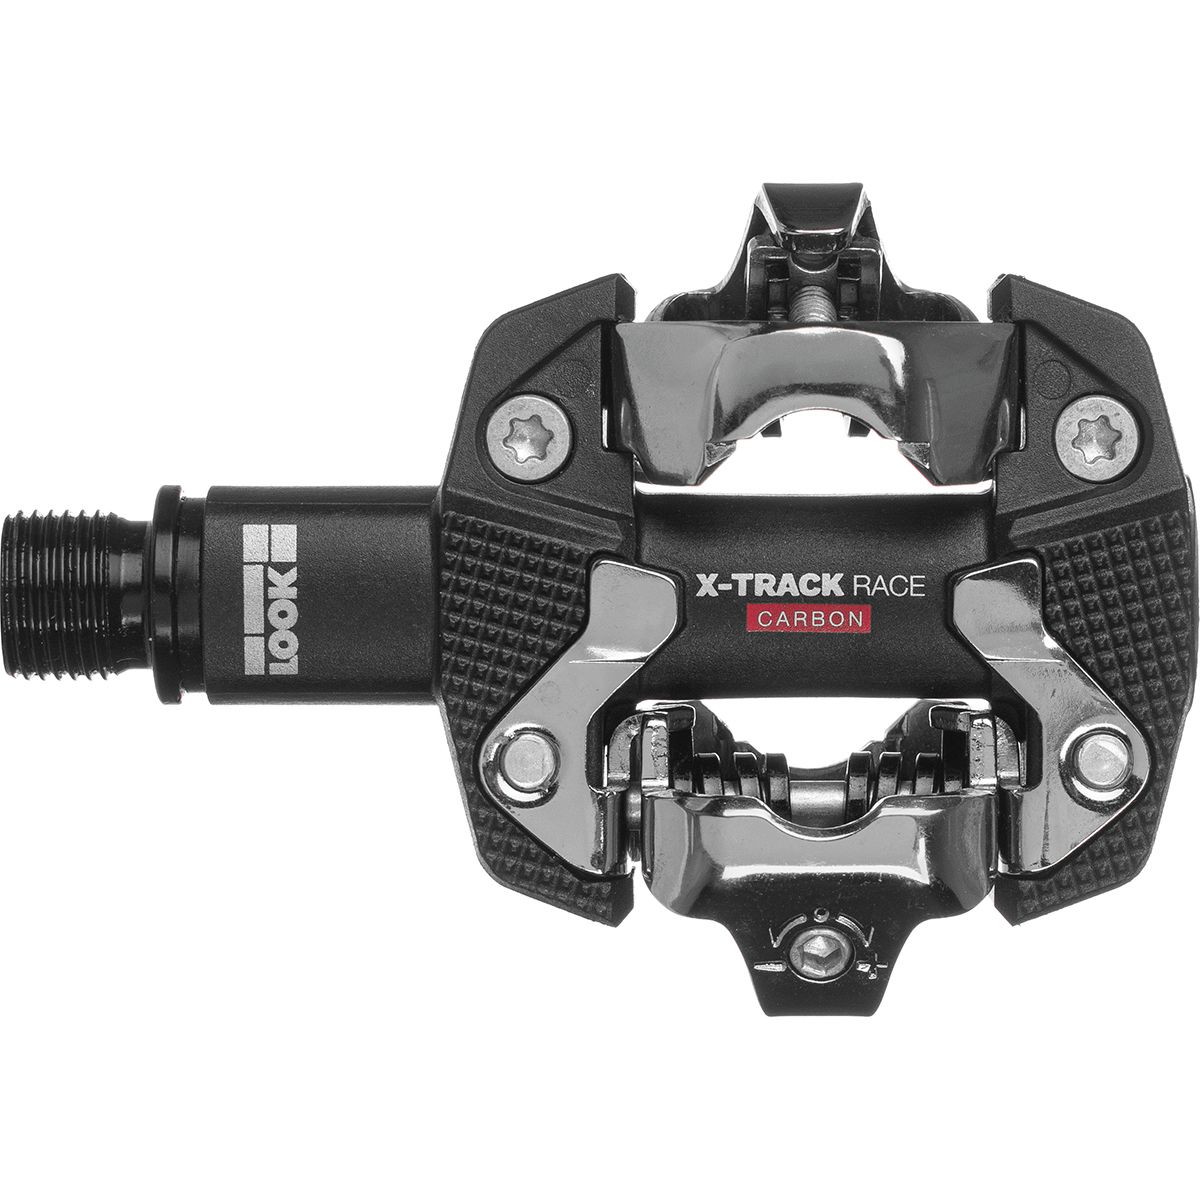 Look Cycle X-Track Race Carbon Pedals